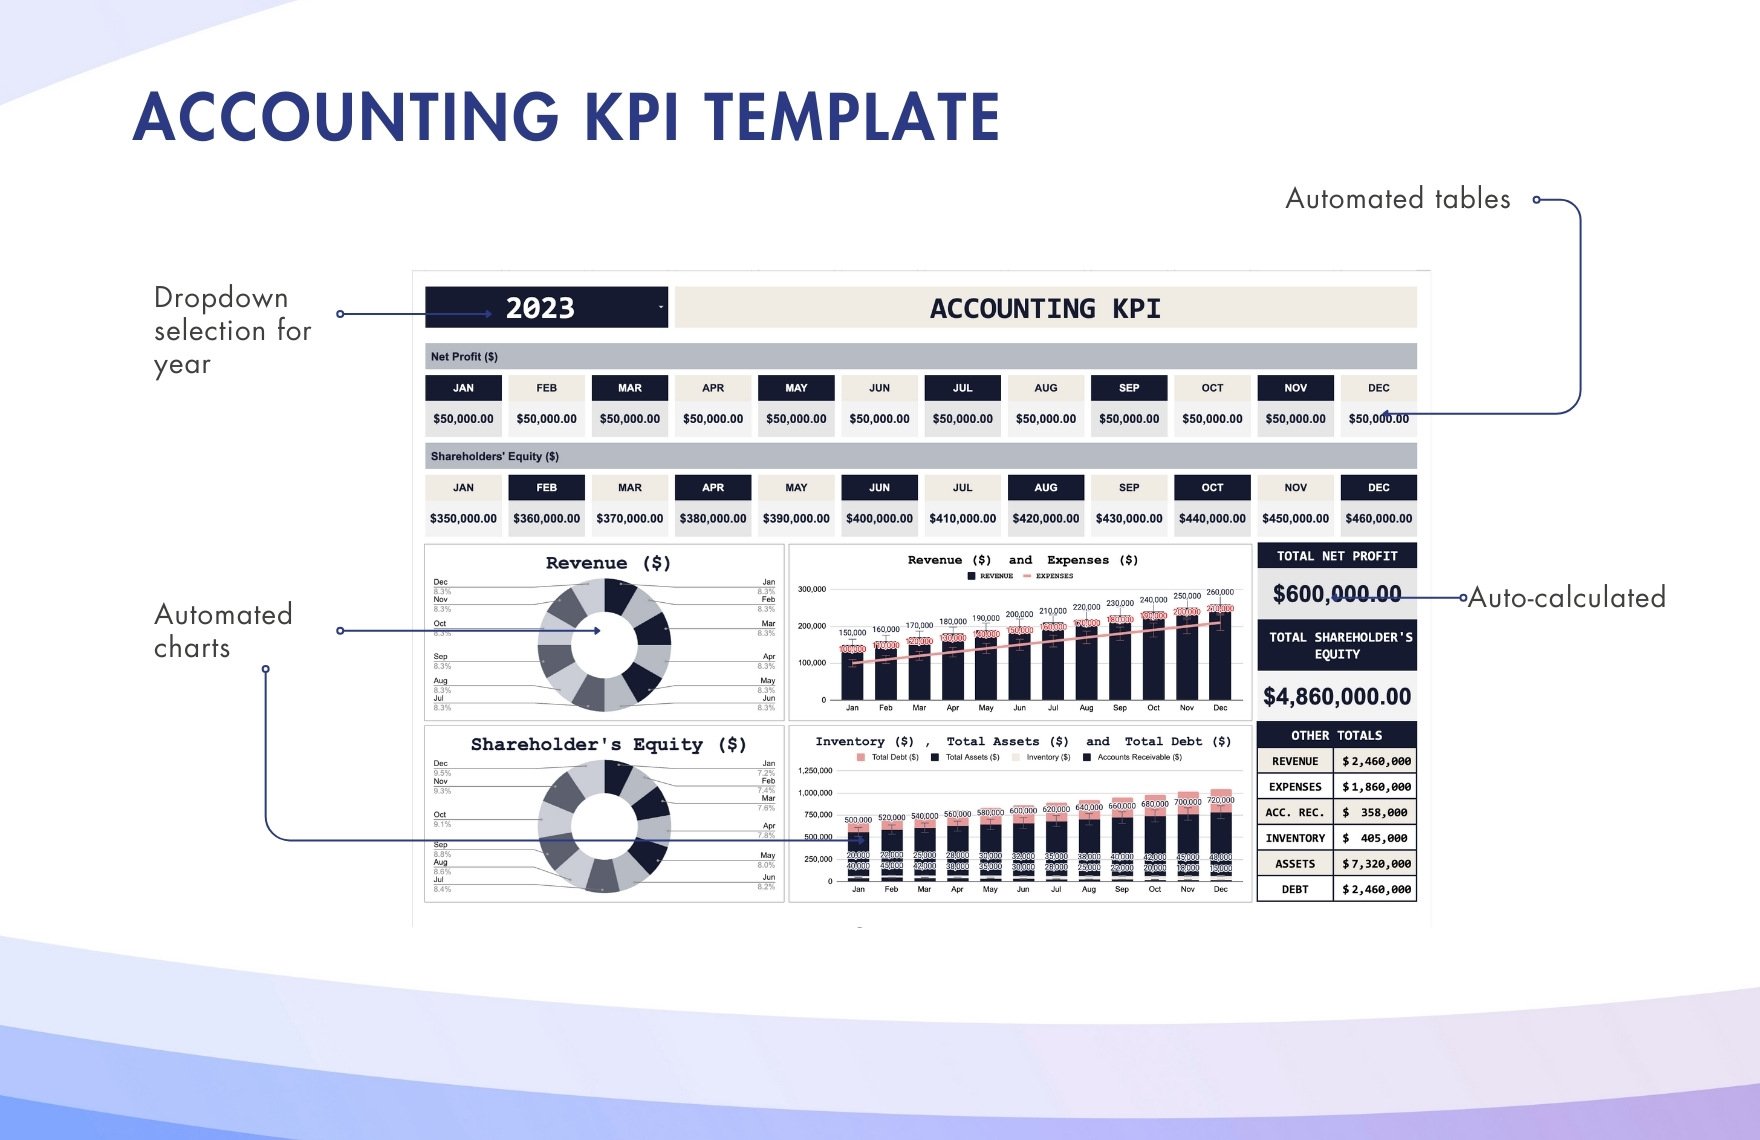 Accounting KPI Template